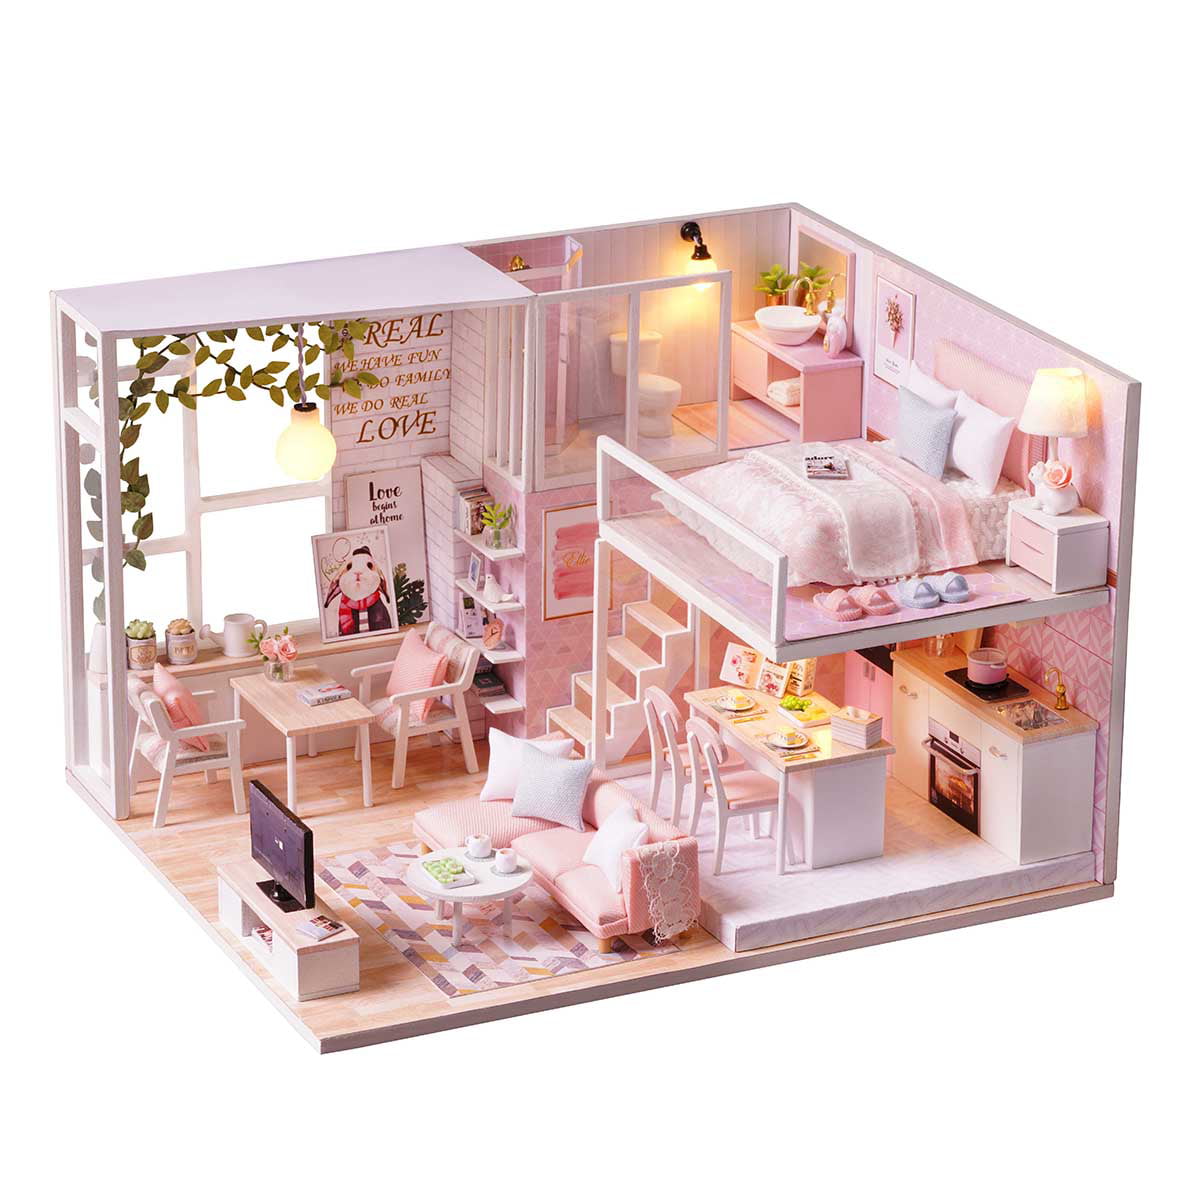 DIY Wooden Toy Doll House Miniature Kit Dollhouse Furniture LED Birthday Gifts 